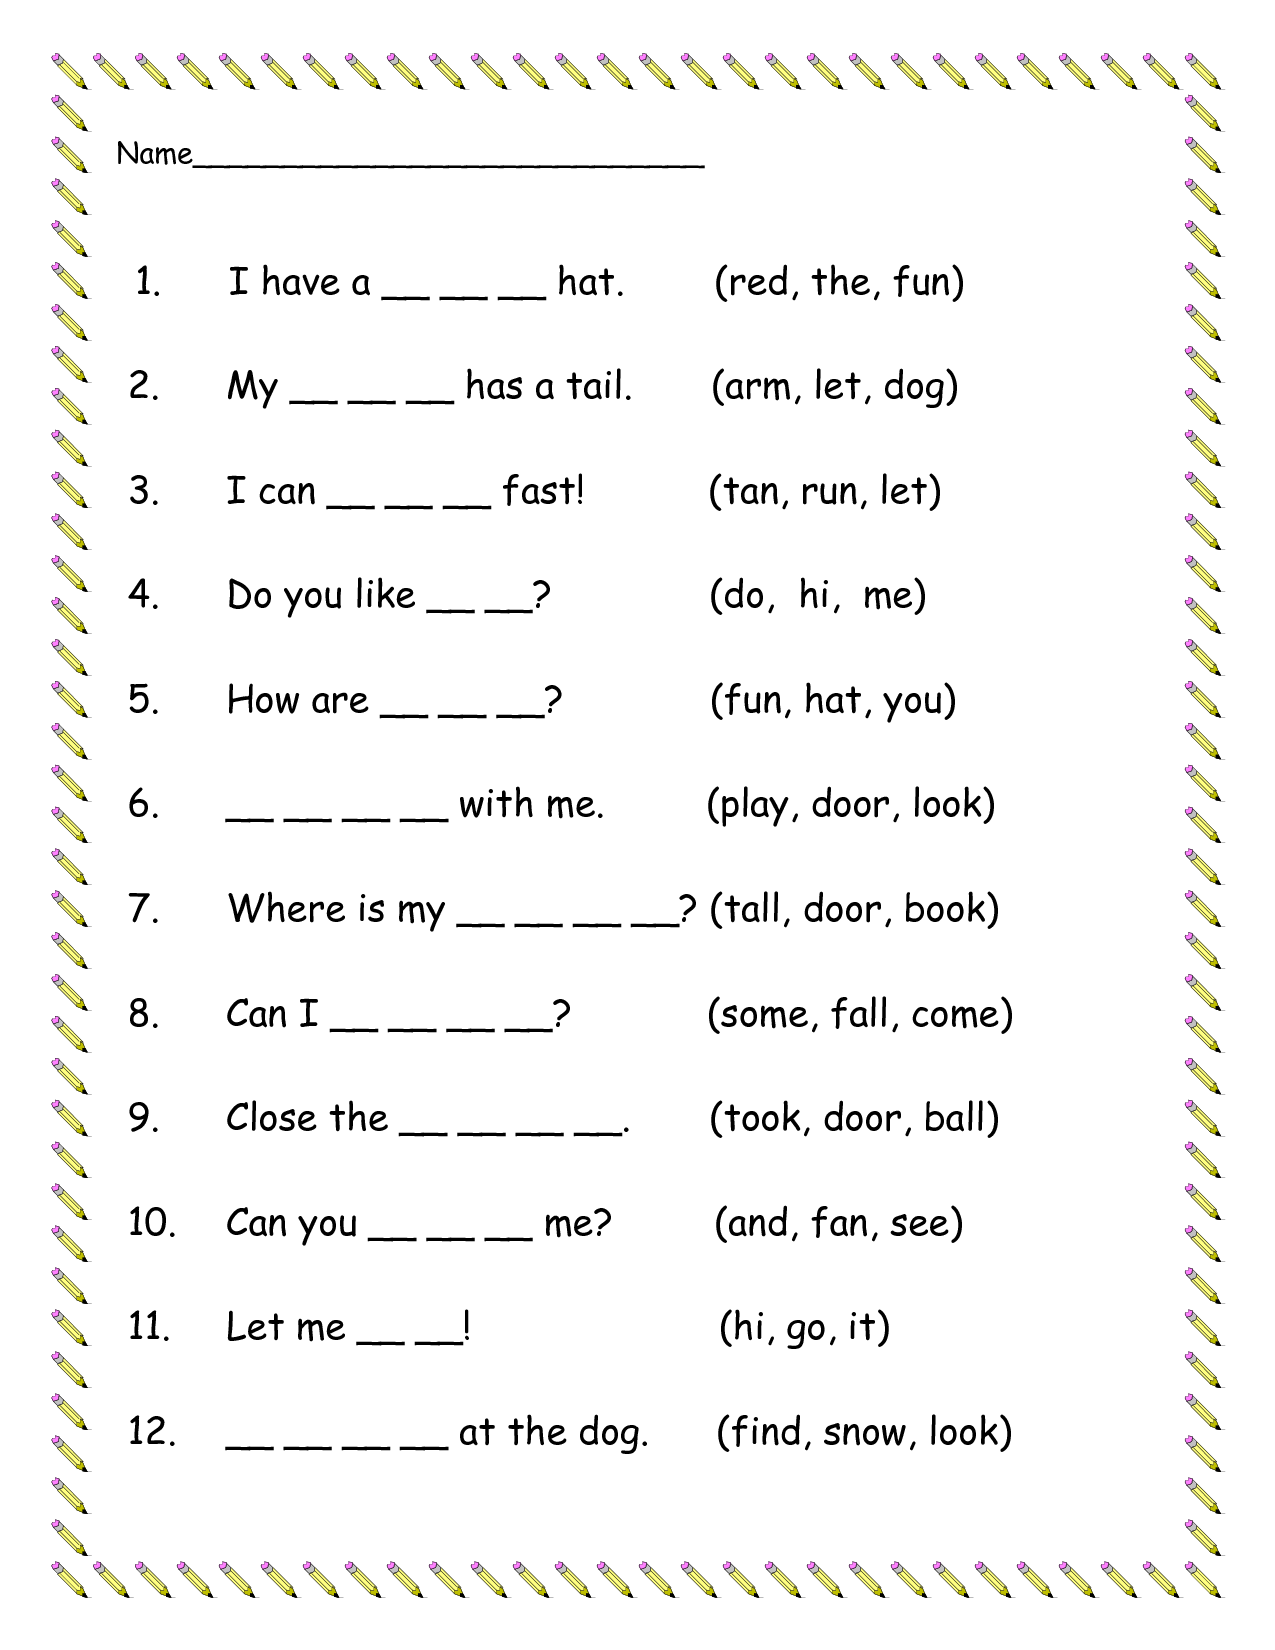 5-best-images-of-kindergarten-dolch-sight-words-printable-images-and